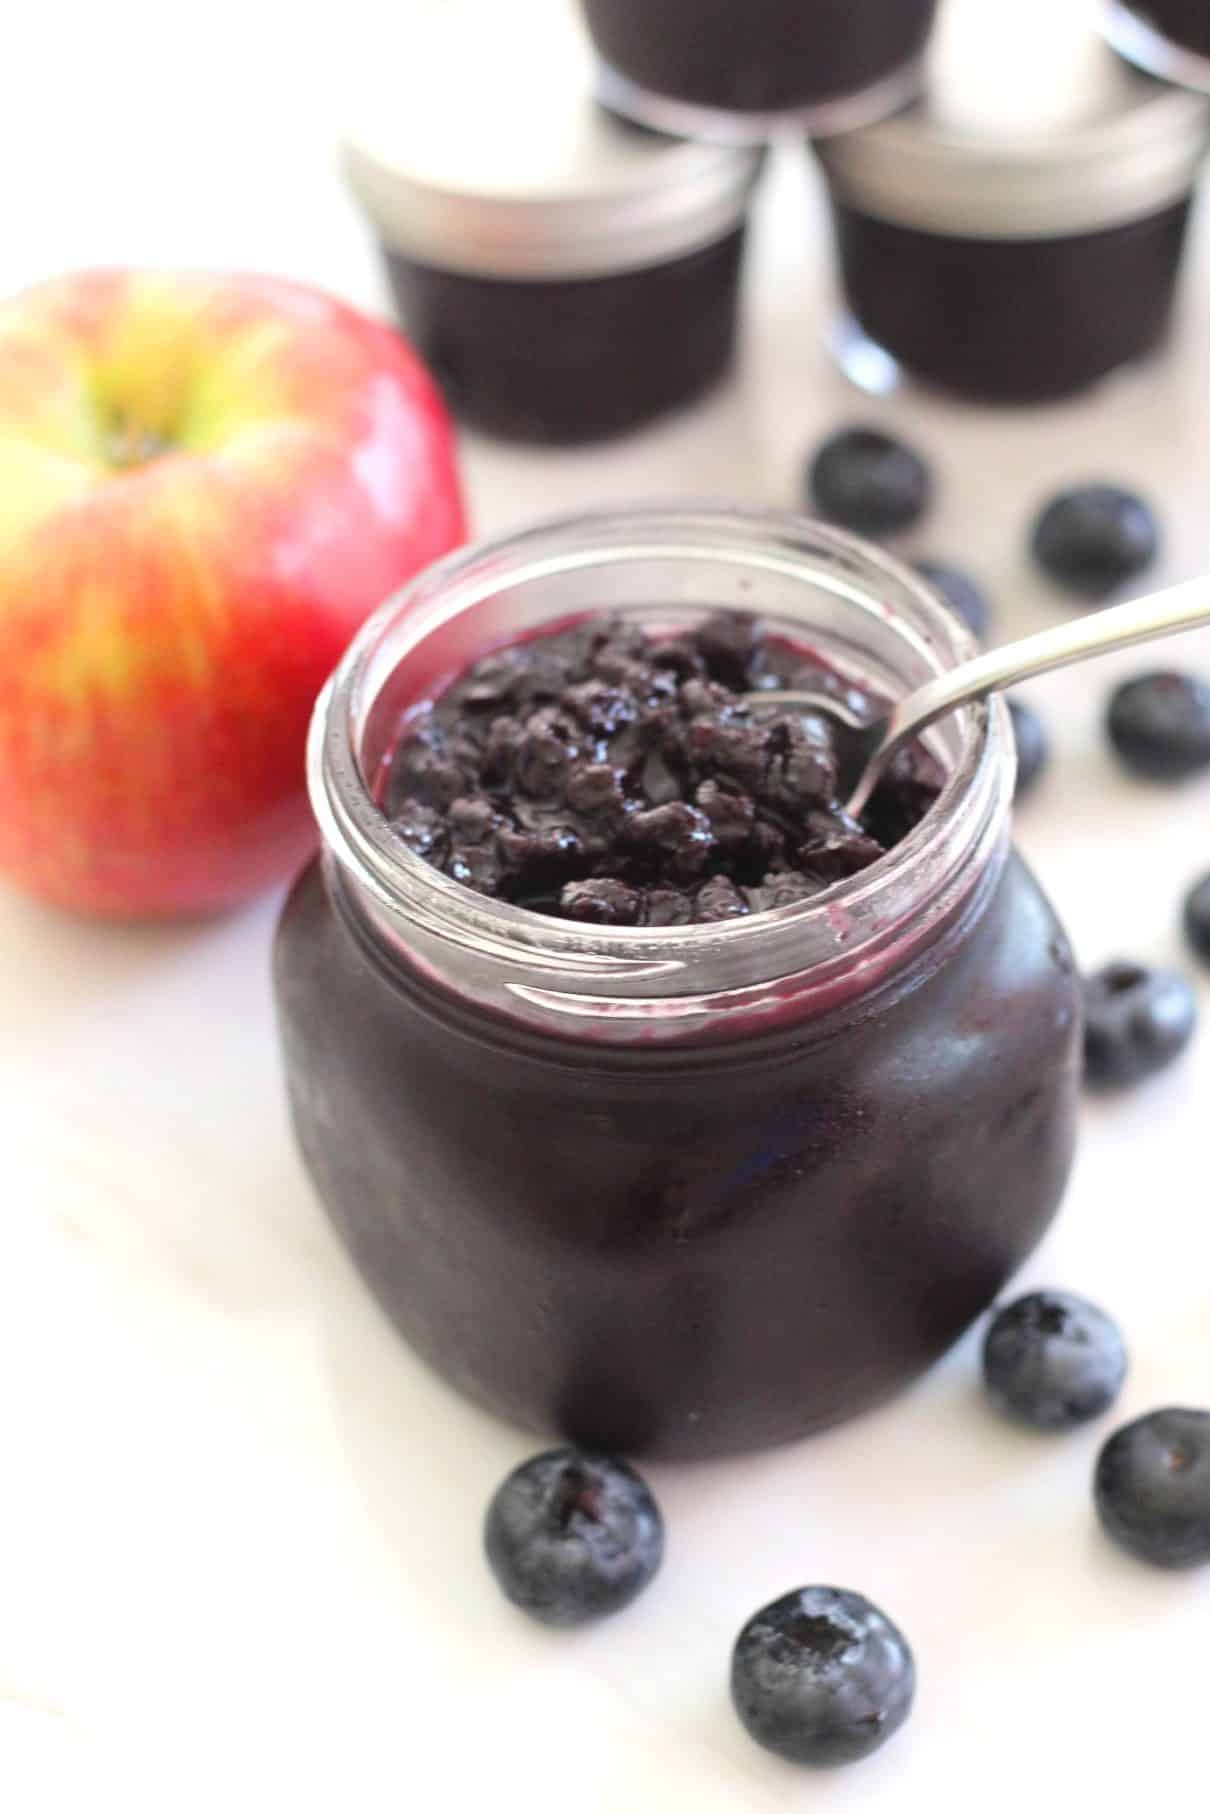 A spoon coming out of blueberry apple jam jar full of jam. In the background you see an apple and jars of jam!